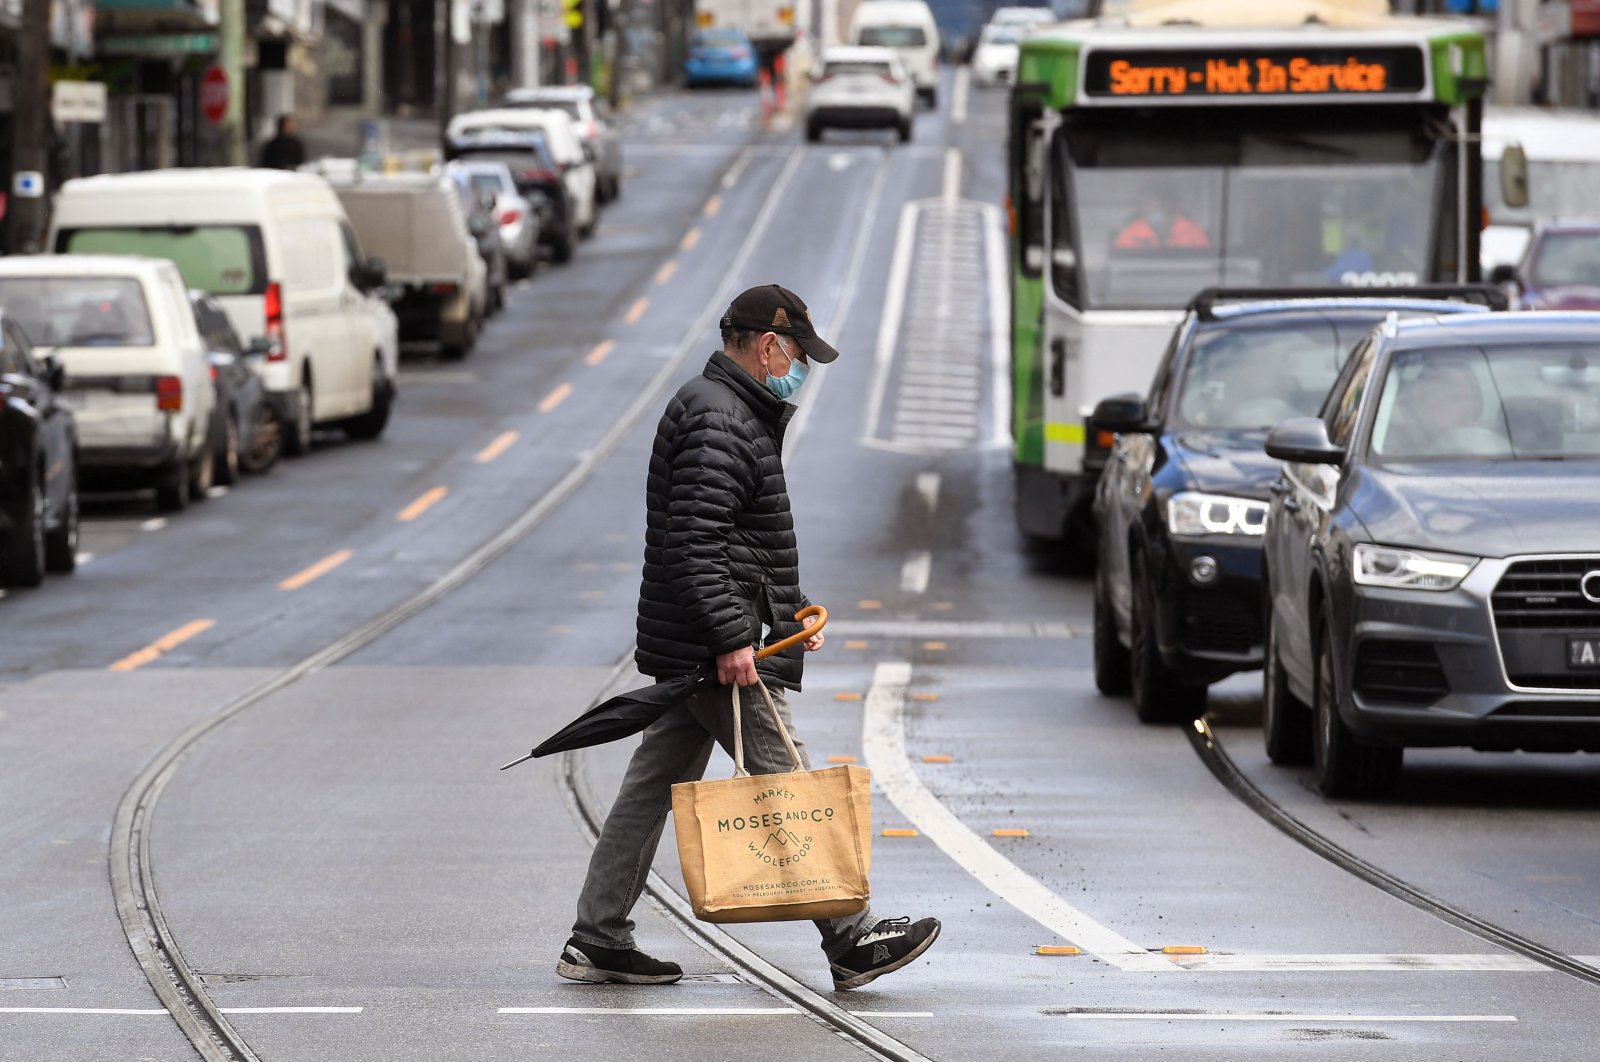 A man crosses a street in Melbourne on Oct. 11, 2021, during a lockdown against COVID-19 coronavirus as Sydney ended a 106-day lockdown. (AFP Photo)